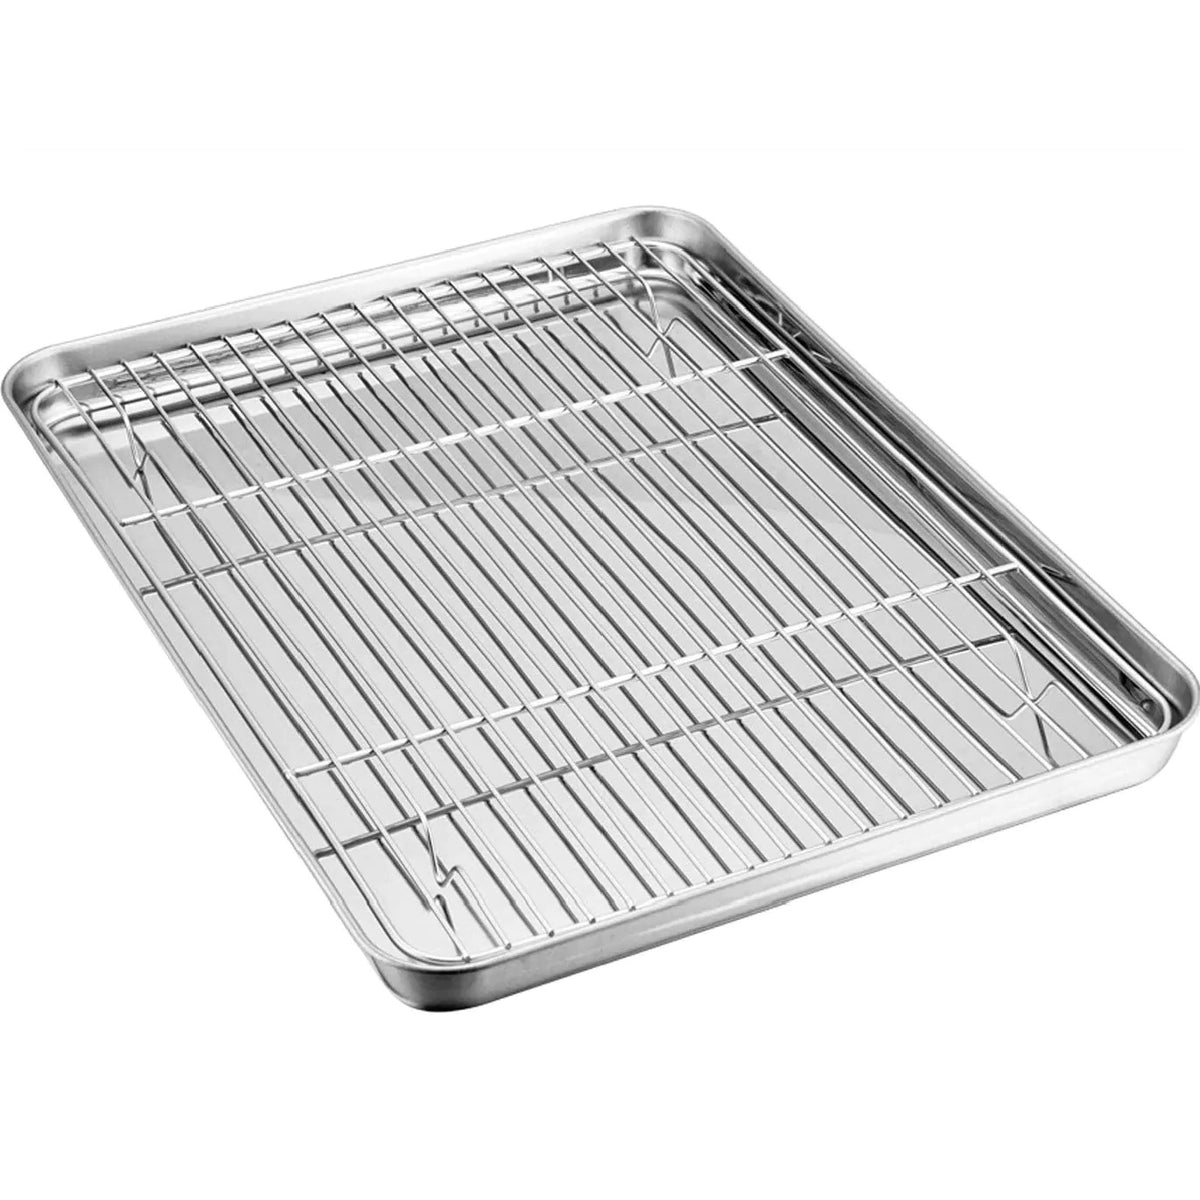 Baking Sheet with Rack Set, E-far Stainless Steel Baking Pans Tray Cookie  Sheet with Cooling Rack, 16 x 12 x 1 inch, Non Toxic 